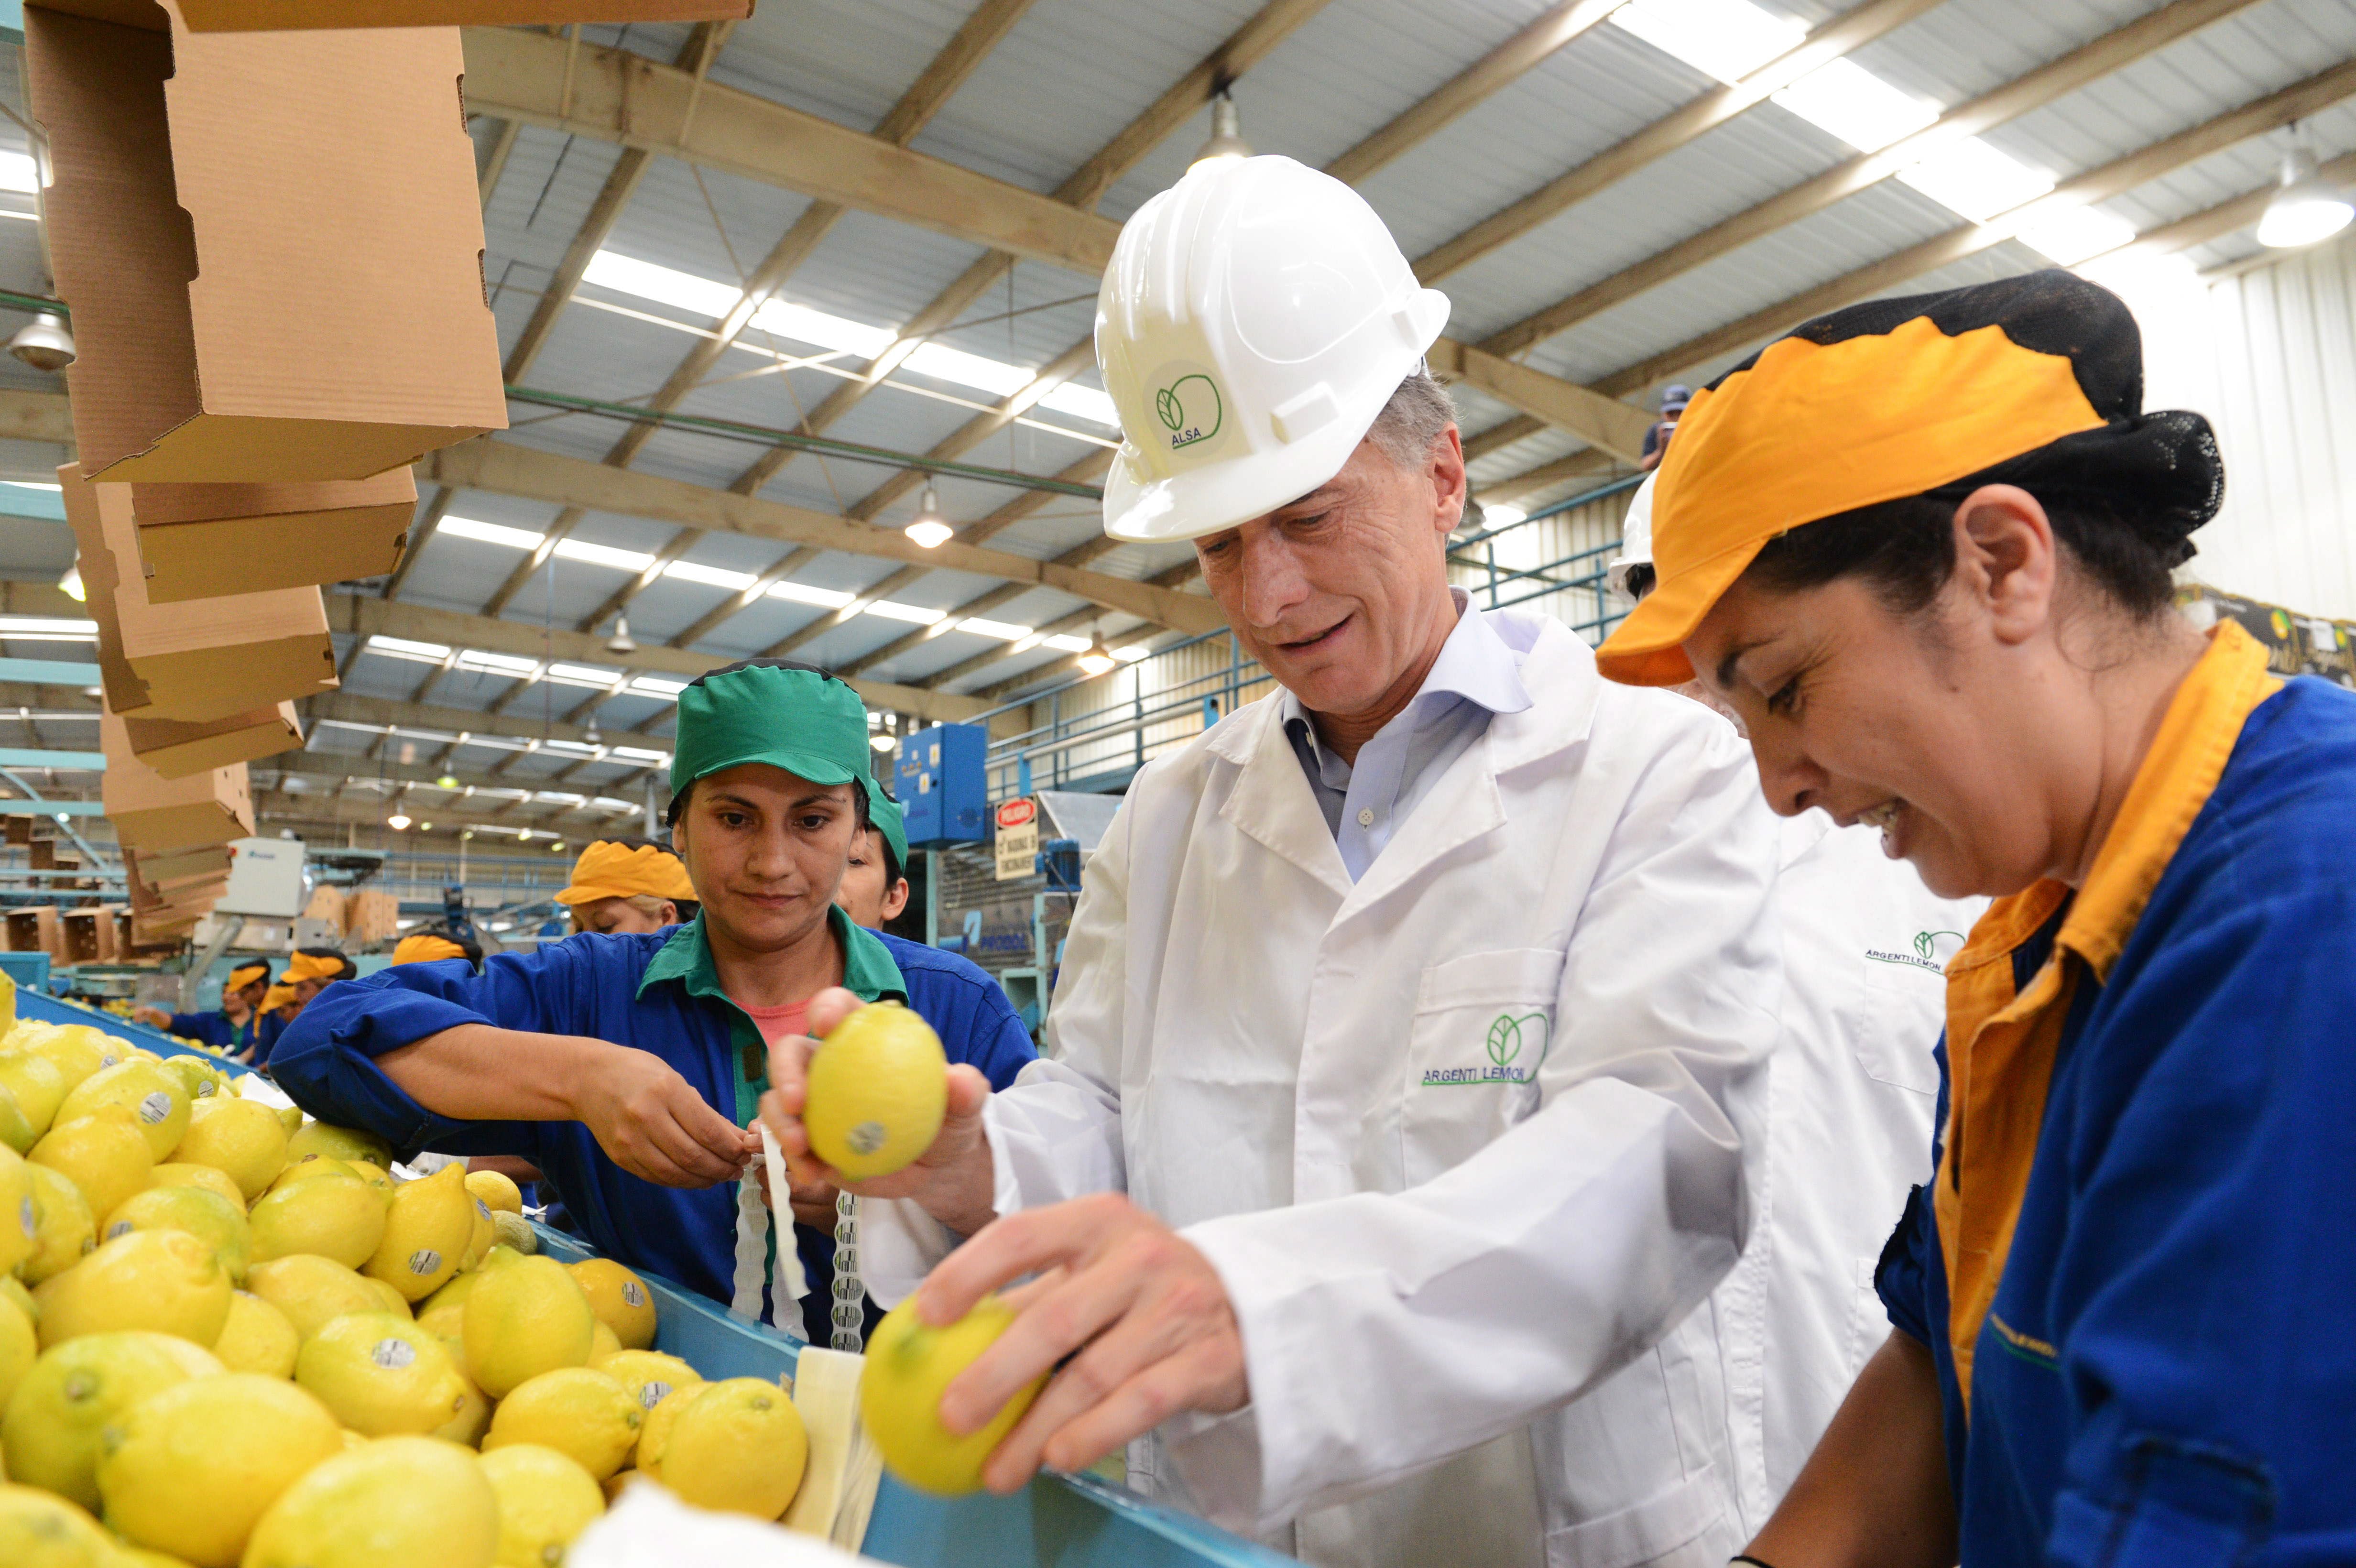 Photo provided by the Argentine president's office showing president Mauricio Macri (C) during a visit to a lemon packing plant in Tucuman, Argentina, April 18, 2018. EPA-EFE/Presidencia Argentina